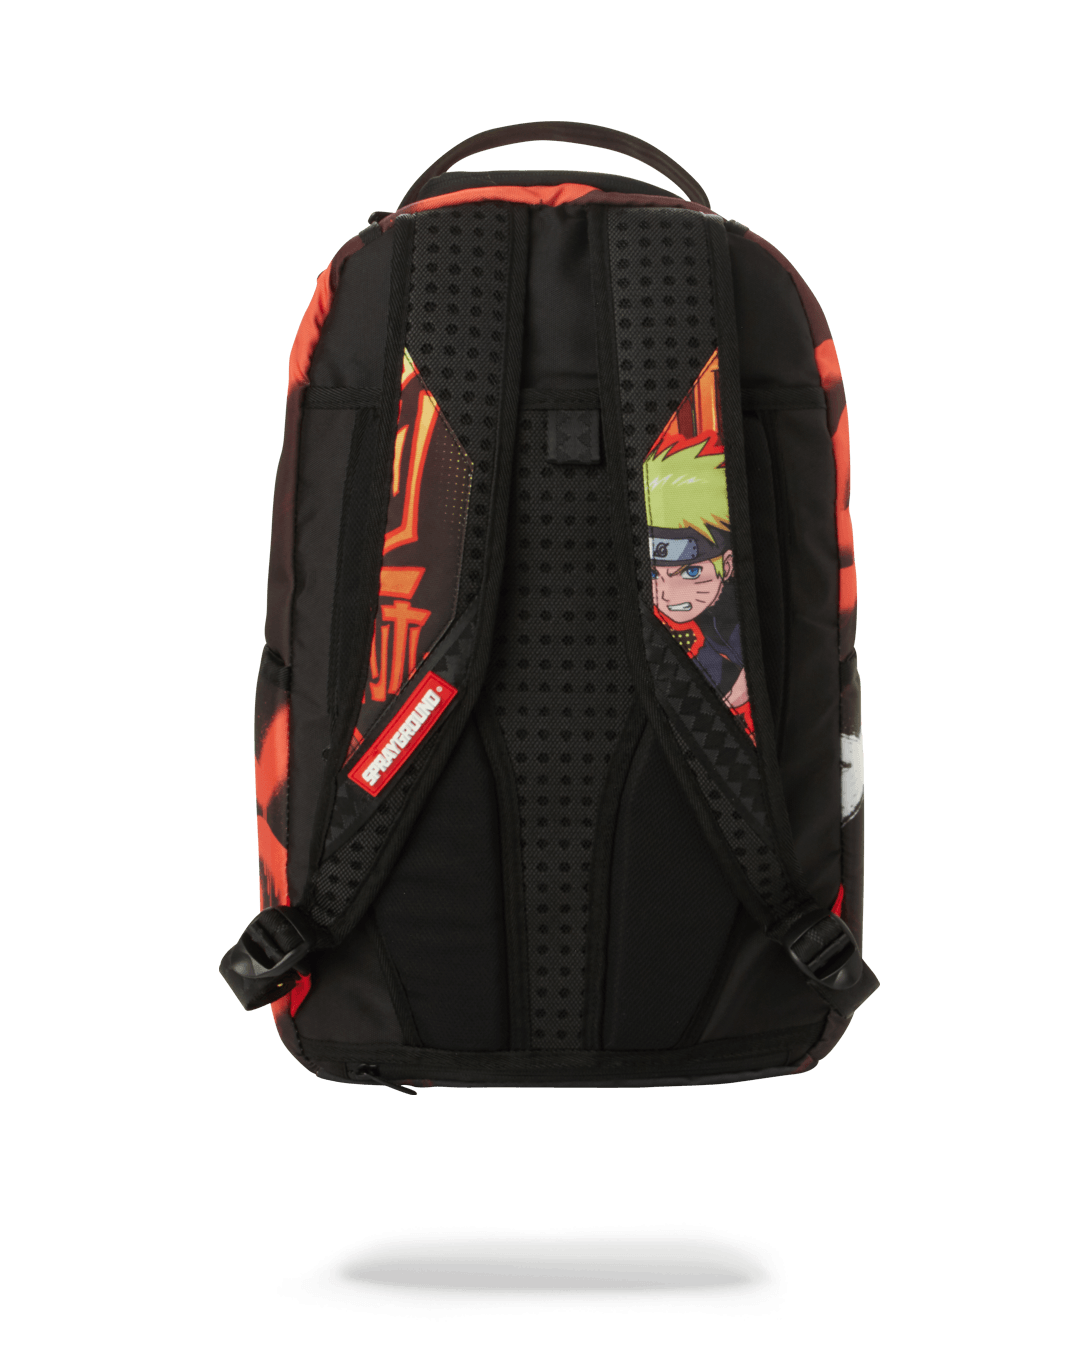 Naruto Shippuden Collection Sling Backpack for Sale in Galt, CA - OfferUp